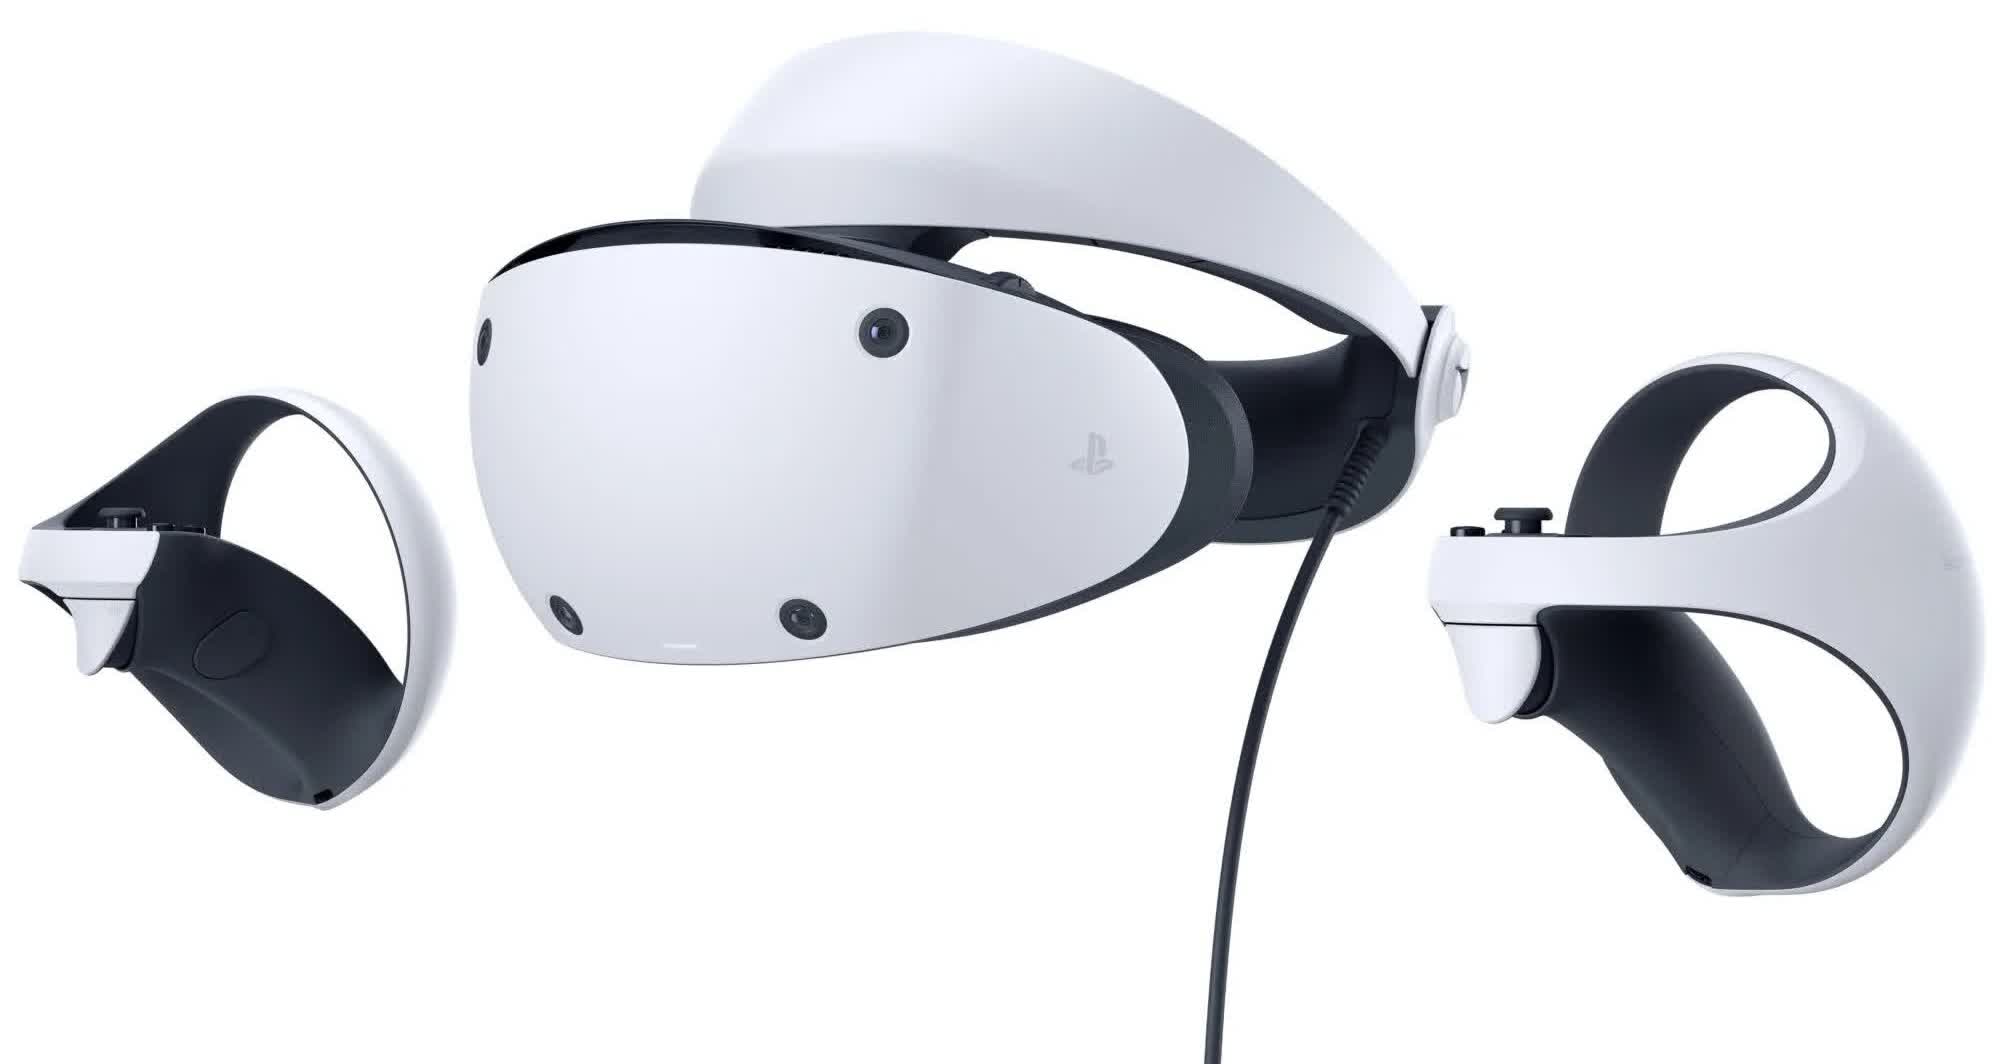 PlayStation VR2 could enter mass production later this year ahead of early 2023 launch